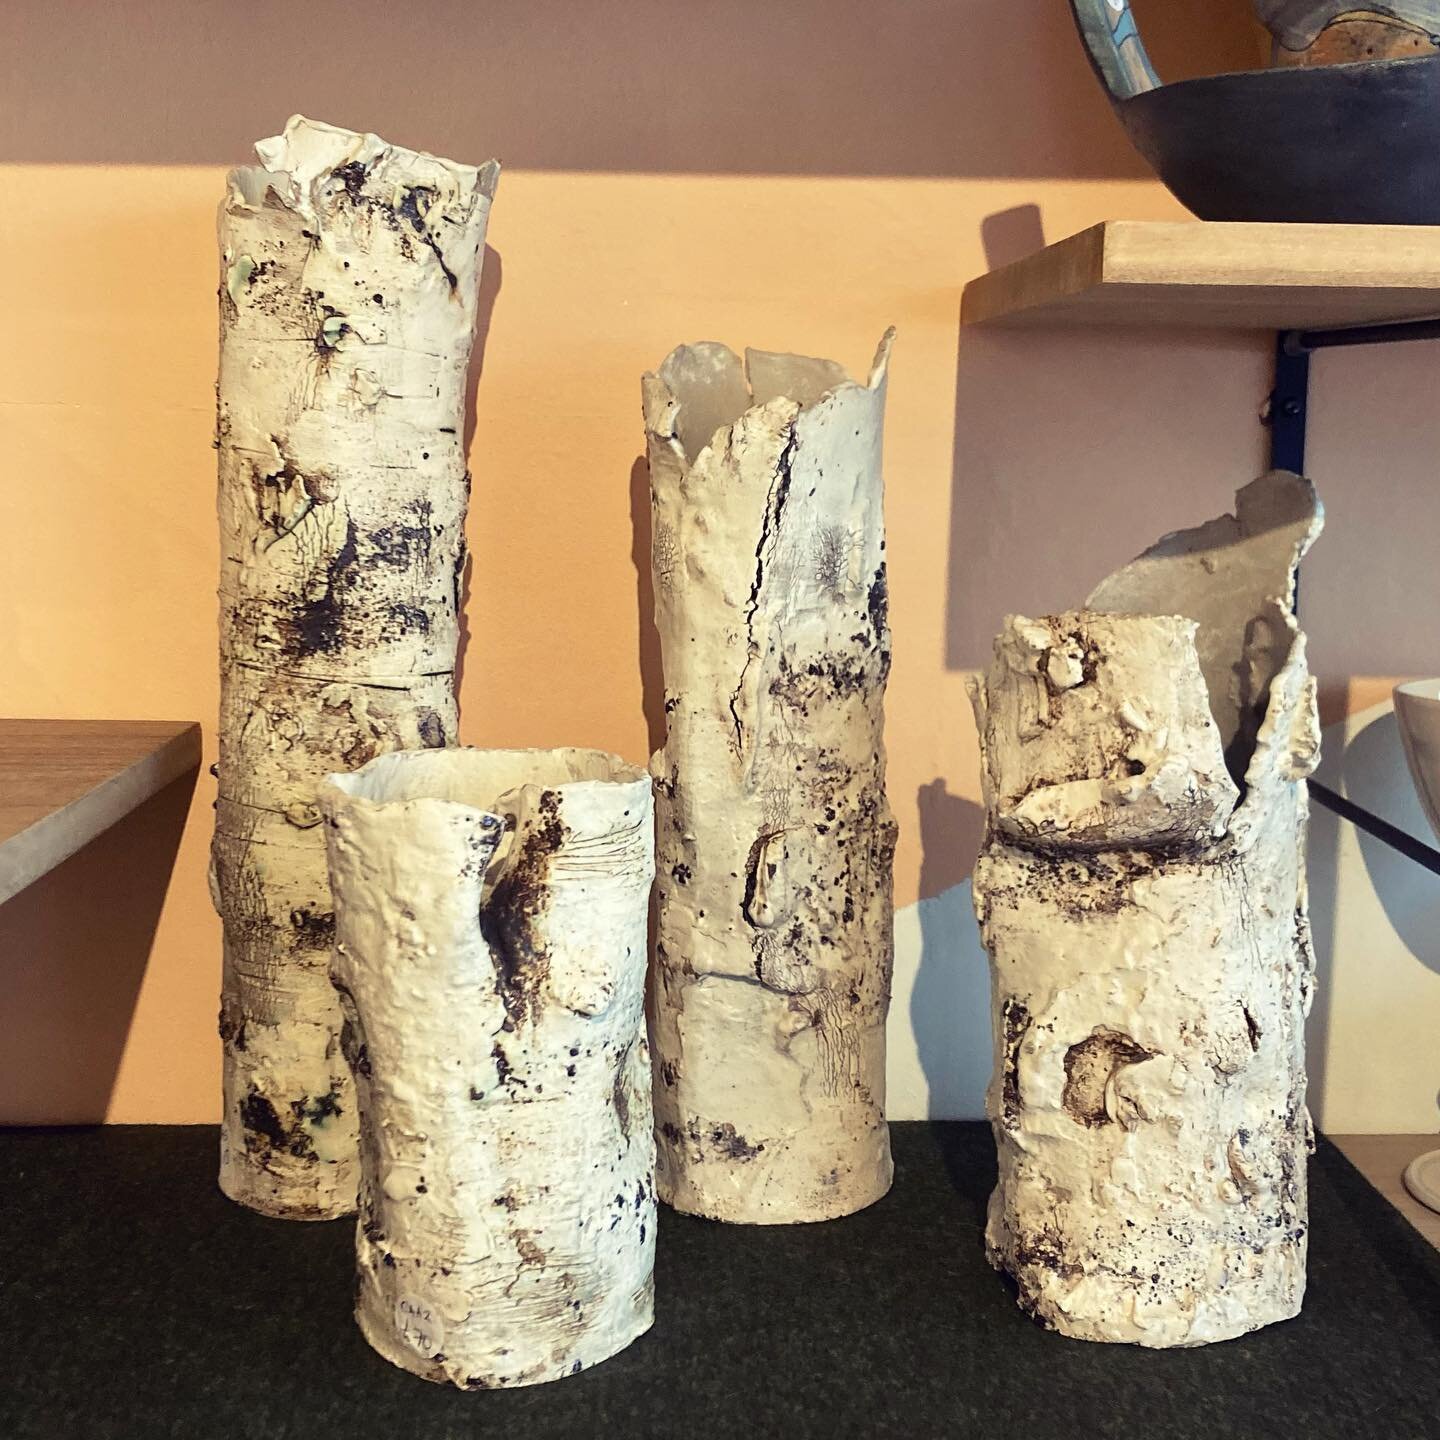 New Silver Birch @artisanchagford and wall vases @florist_from_the_forest Head to the beautiful Dartmoor town  of Chagford this Easter. #dartmoor #chagford #visitdevon #silver #birch #ceramictrees @westcountrypotters @devonopenstudios #madeindevon #u